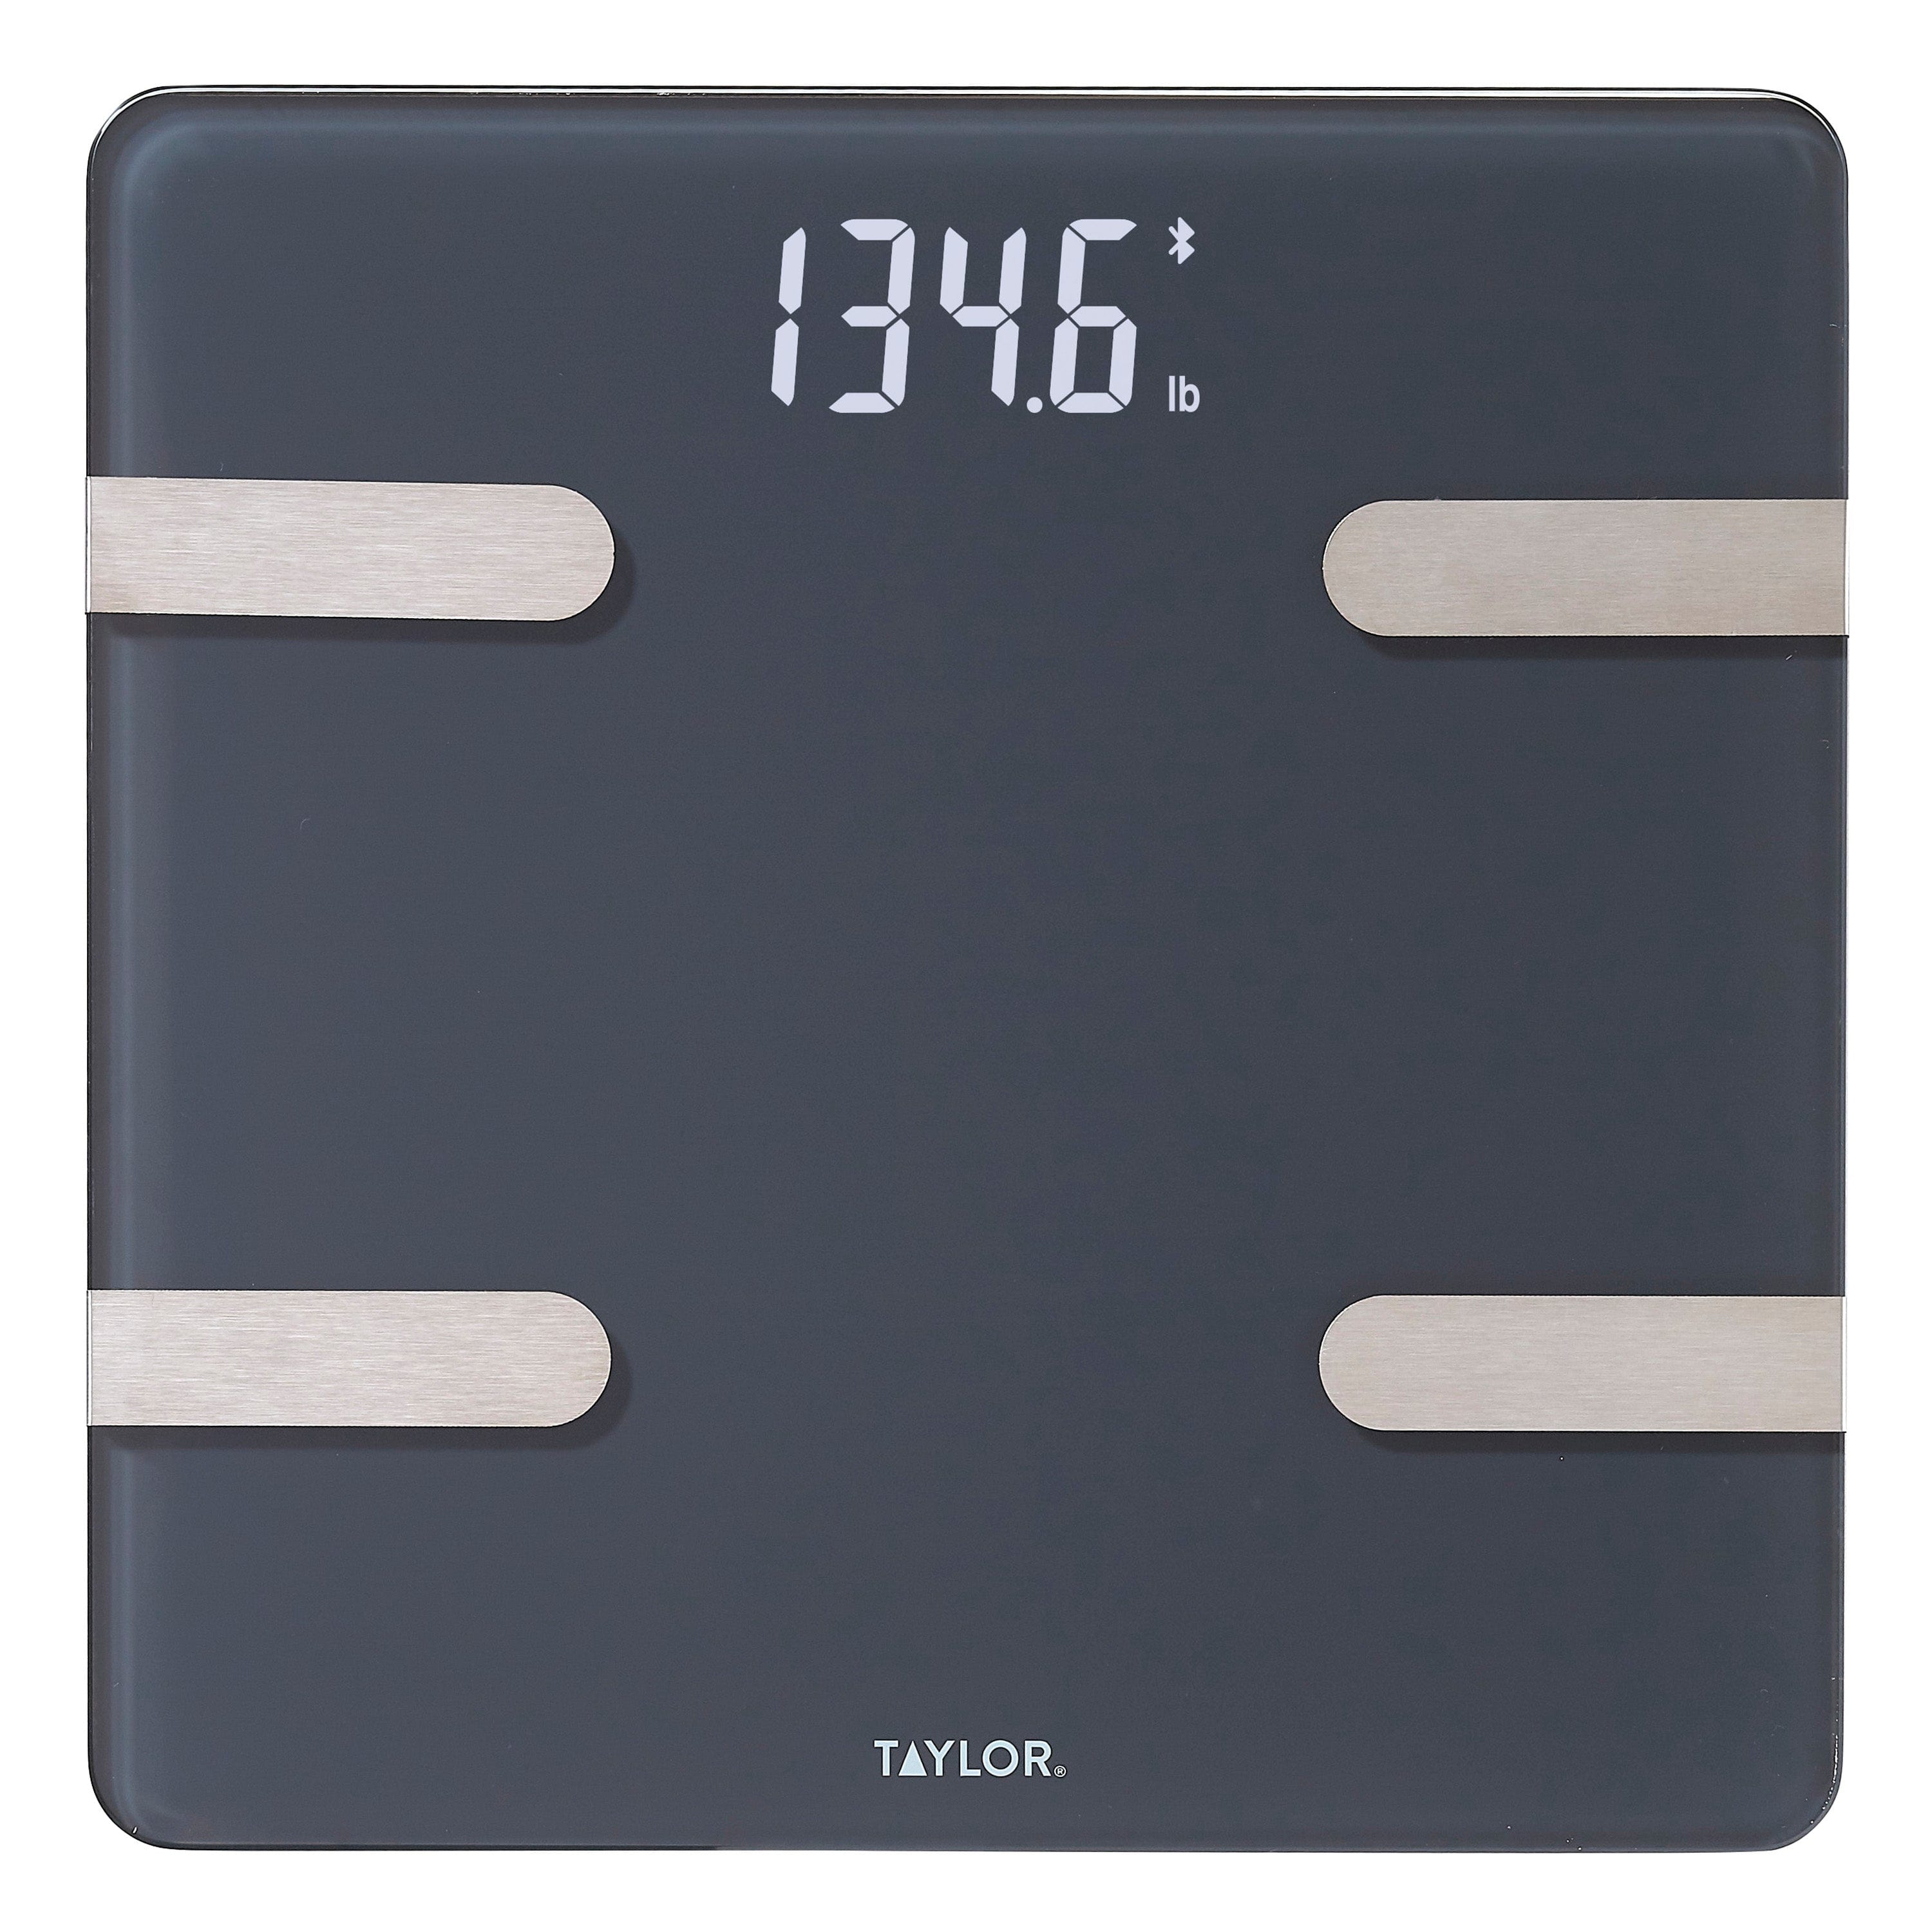 Scales for Body Weight and Fat-Digital Body Scale Smart, Precise  Measurement Bluetooth Body Fat Scale, App Sync Body Fat Measurement Device